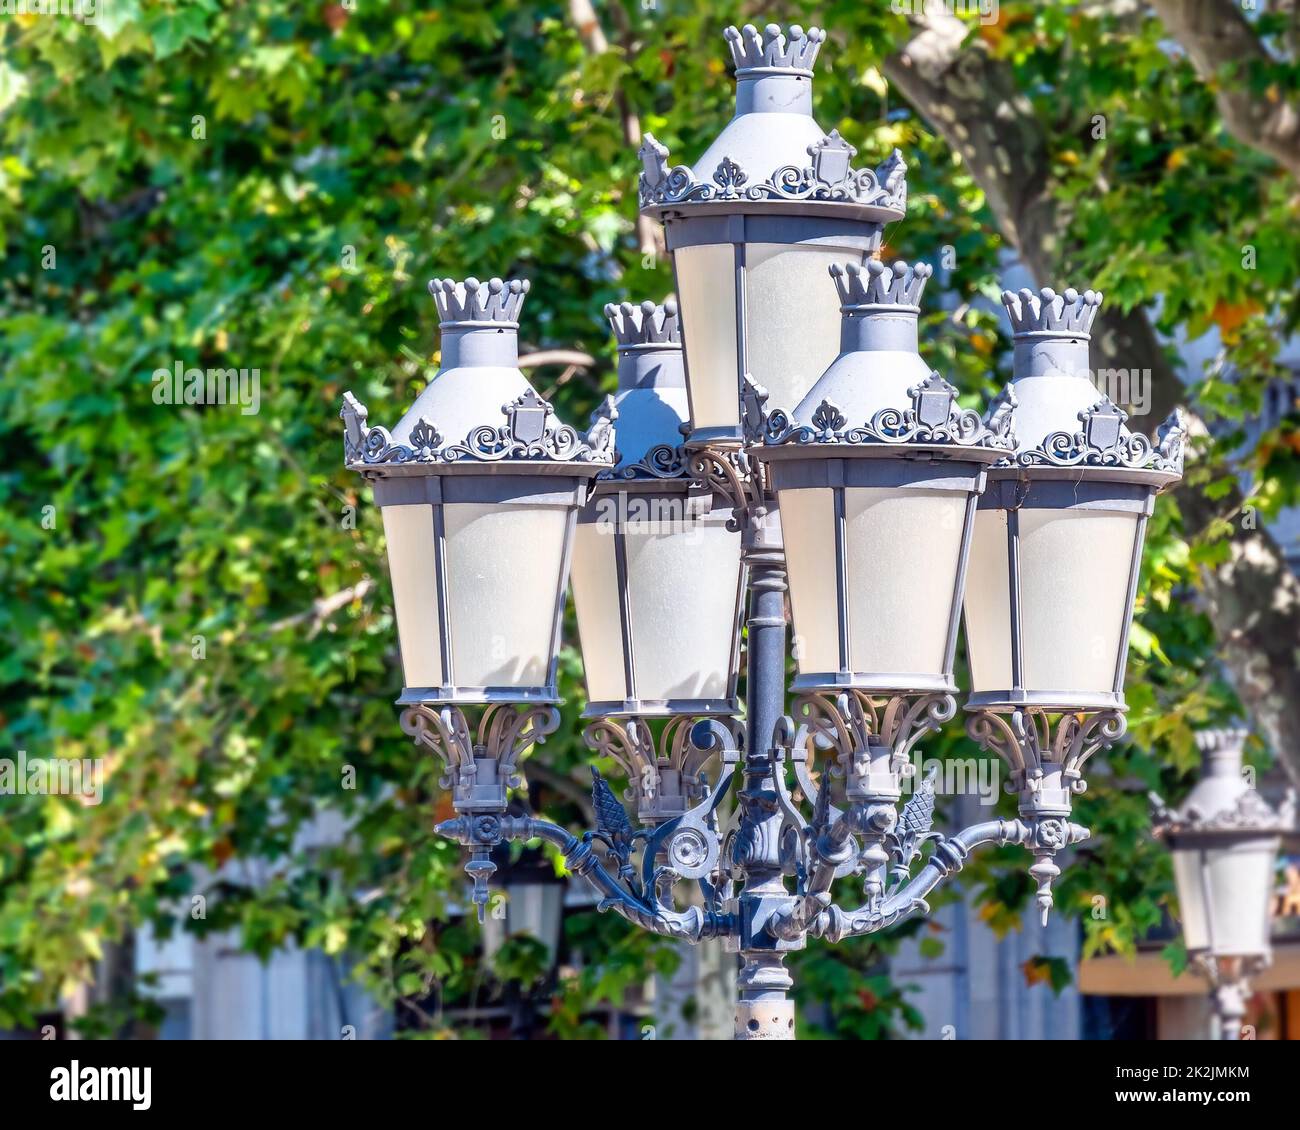 La Rambla. Large electric lamp with an old-style Stock Photo